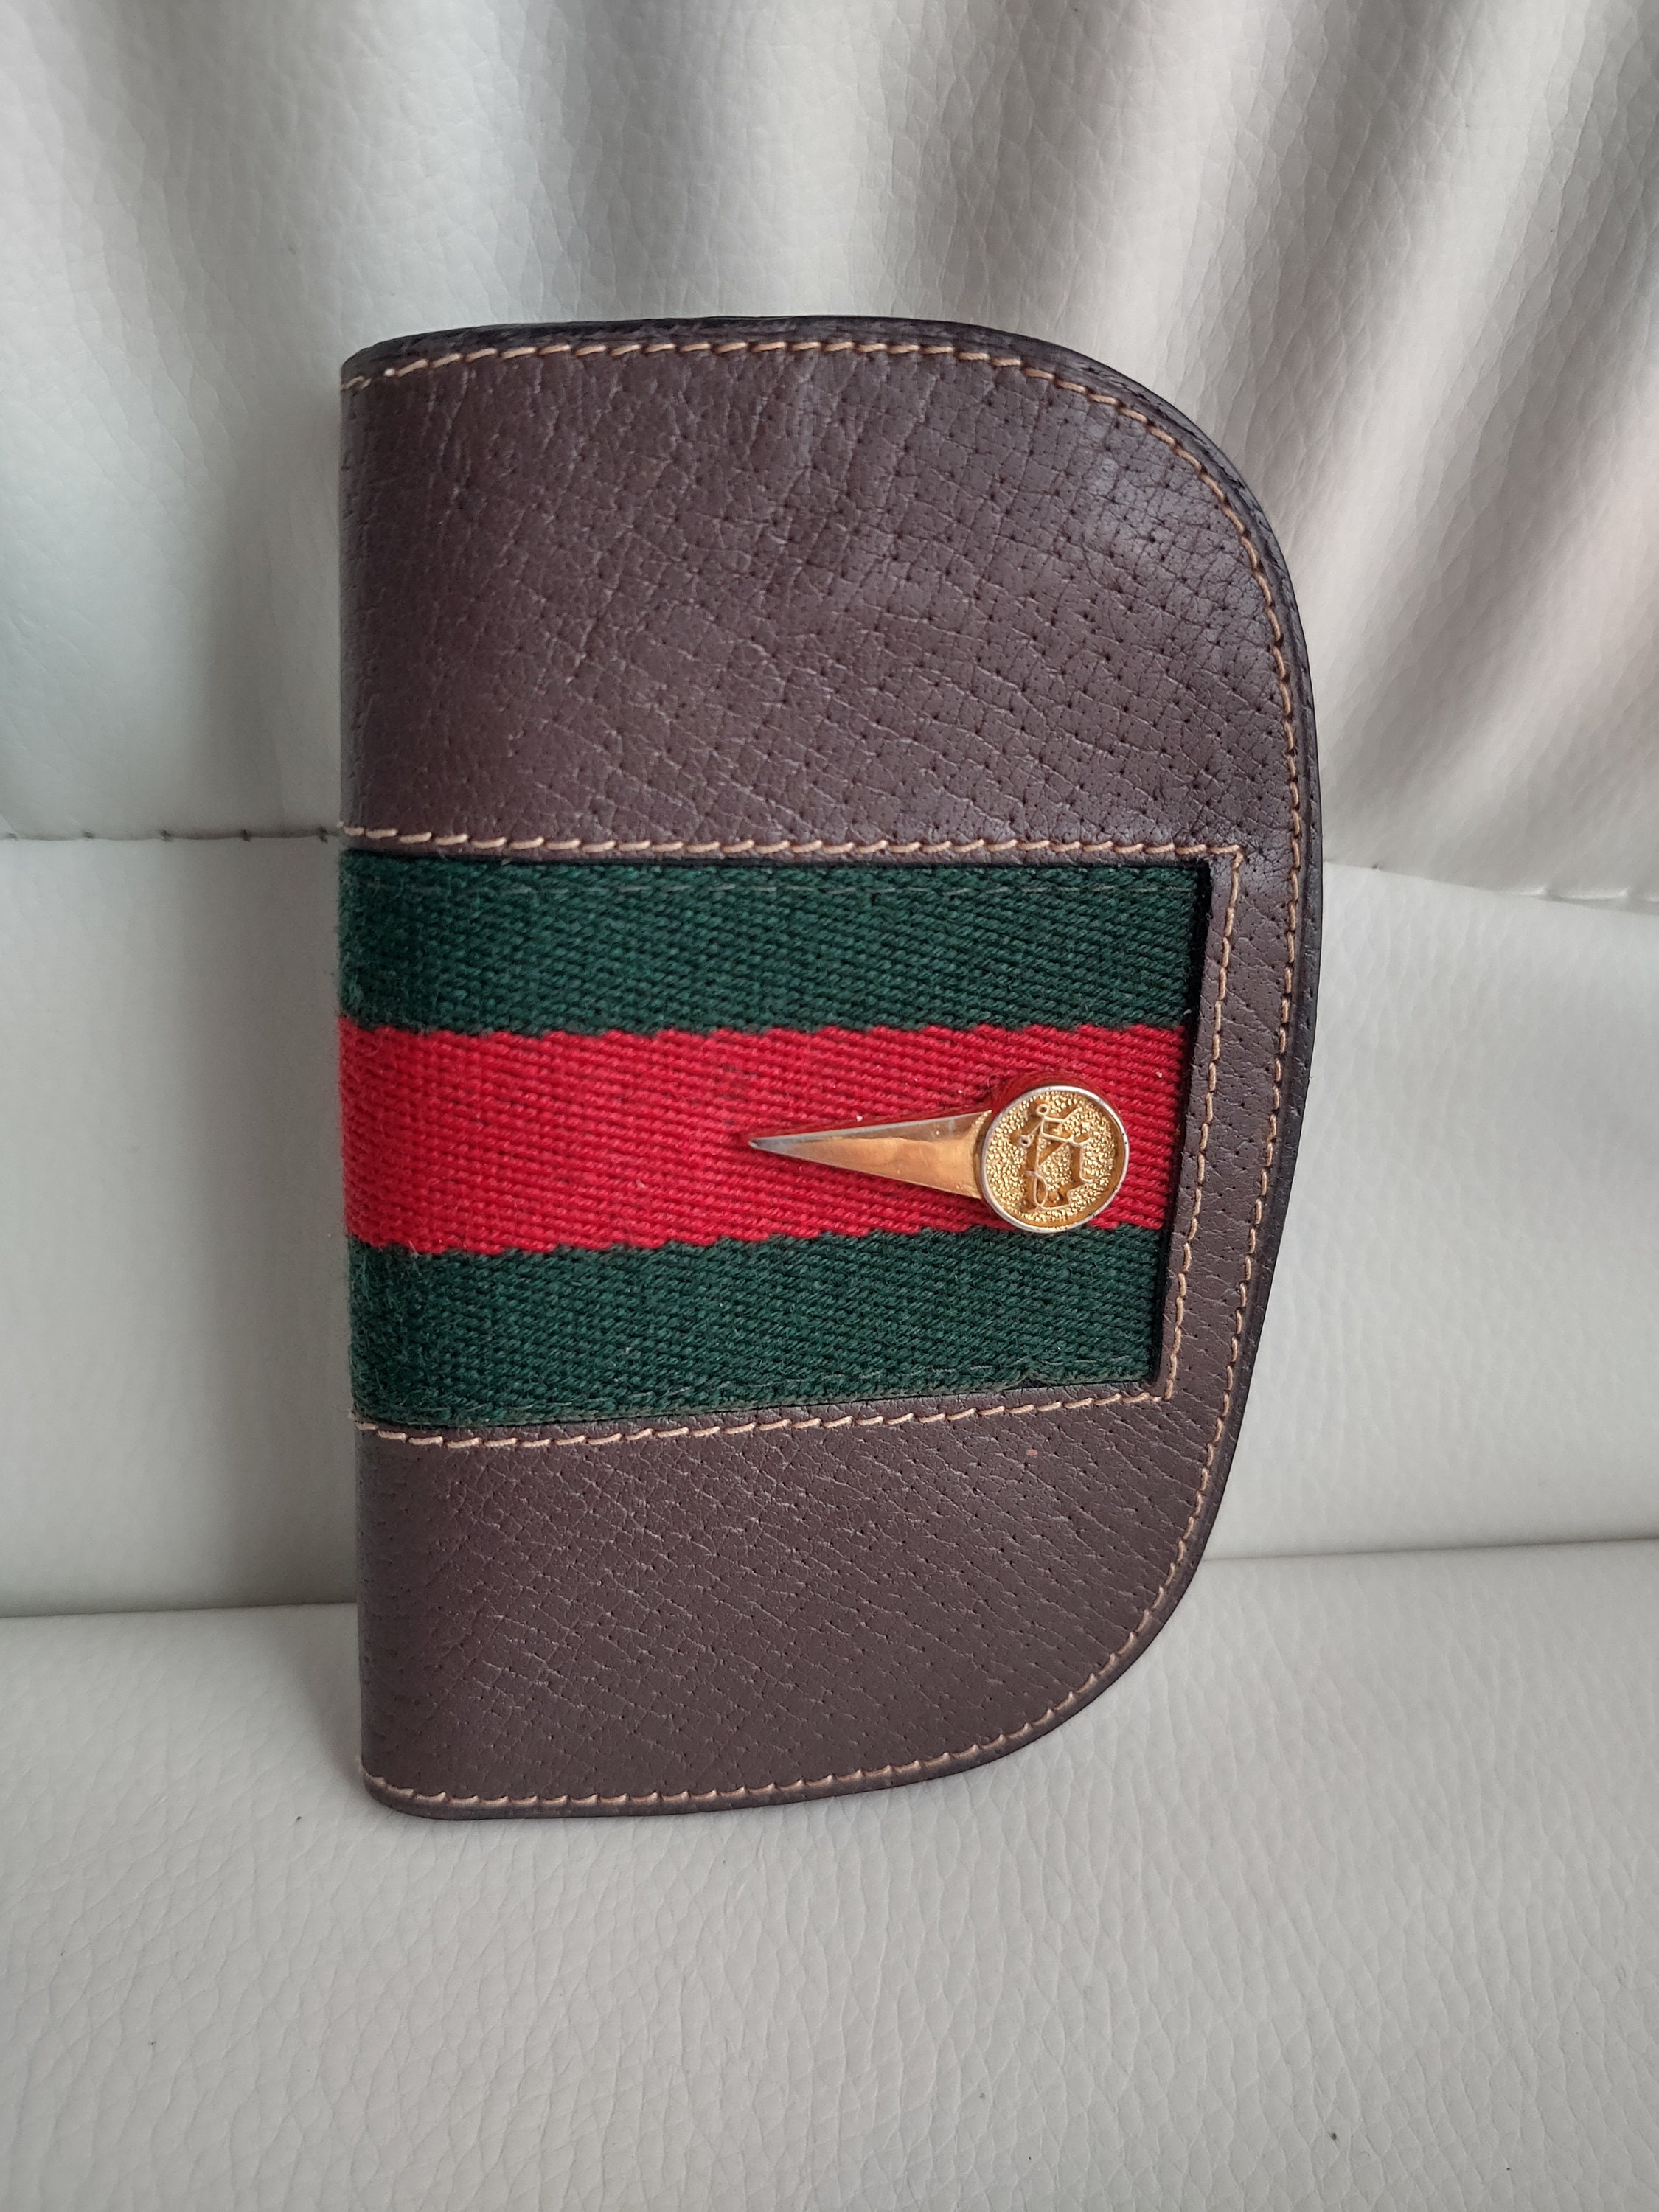 VINTAGE ICONIC AUTHENTIC GUCCI RED/GREEN RIBBON TAN LEATHER